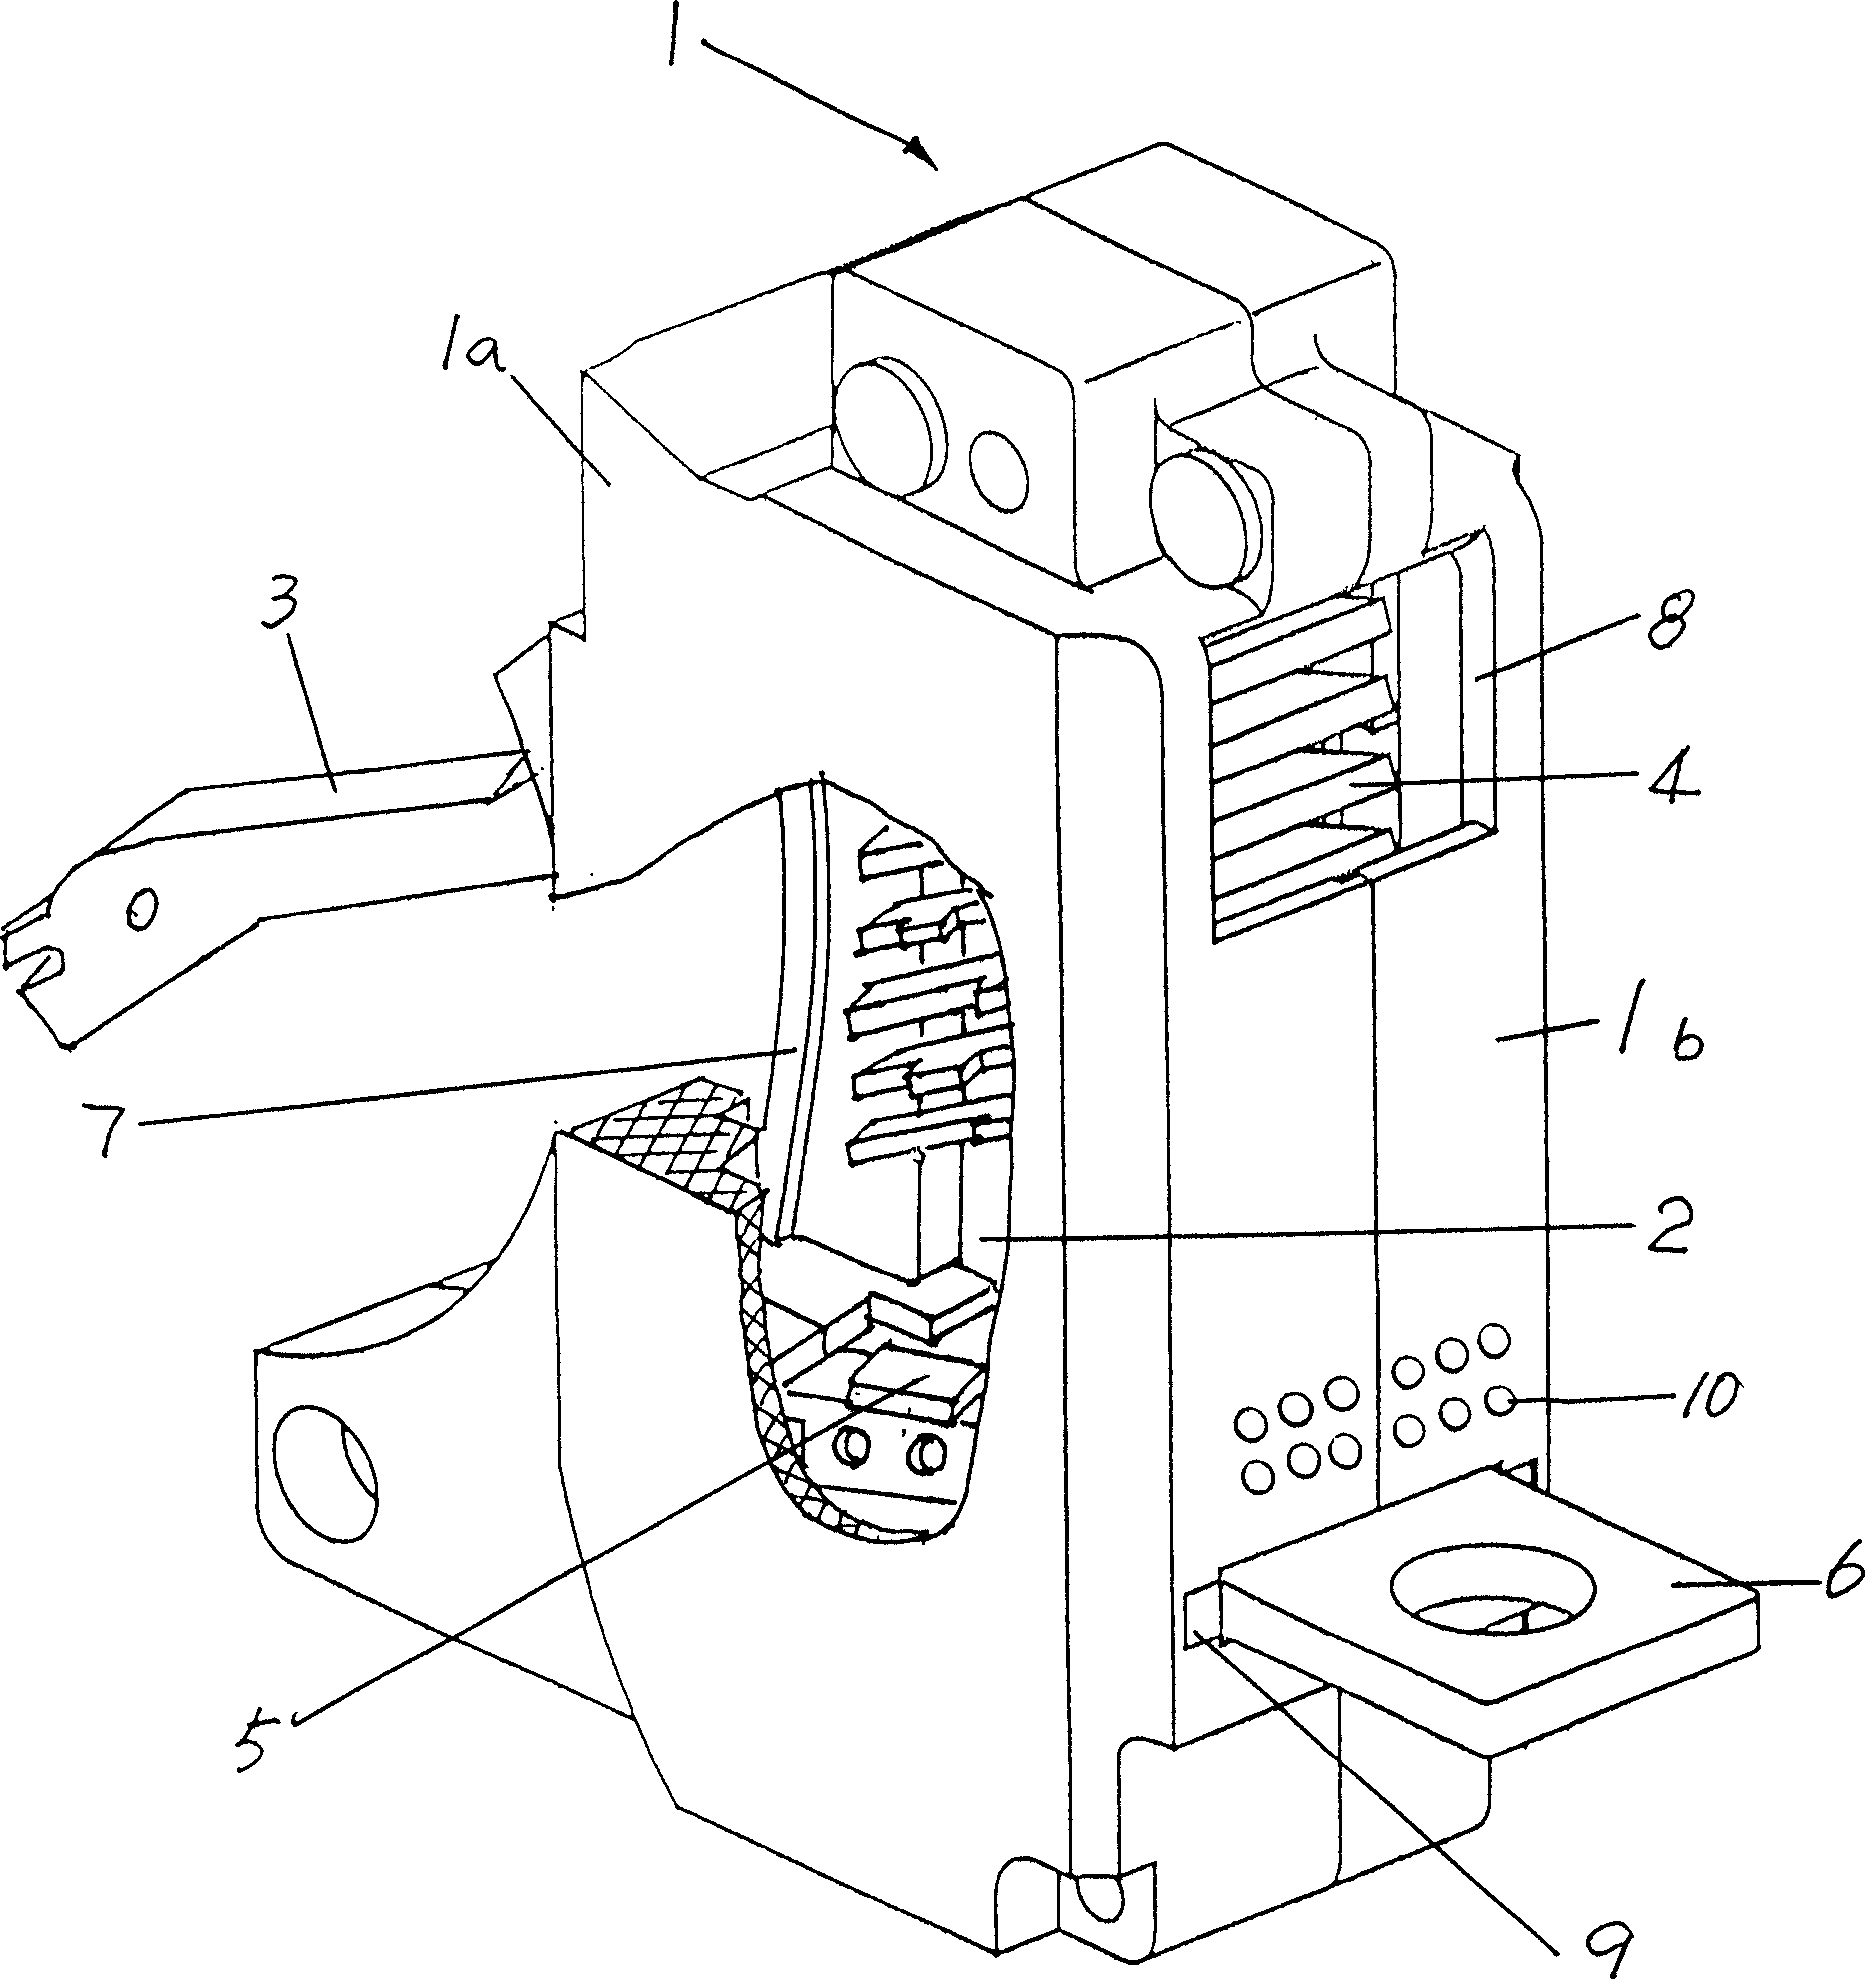 Arc-control device for circuit breaker